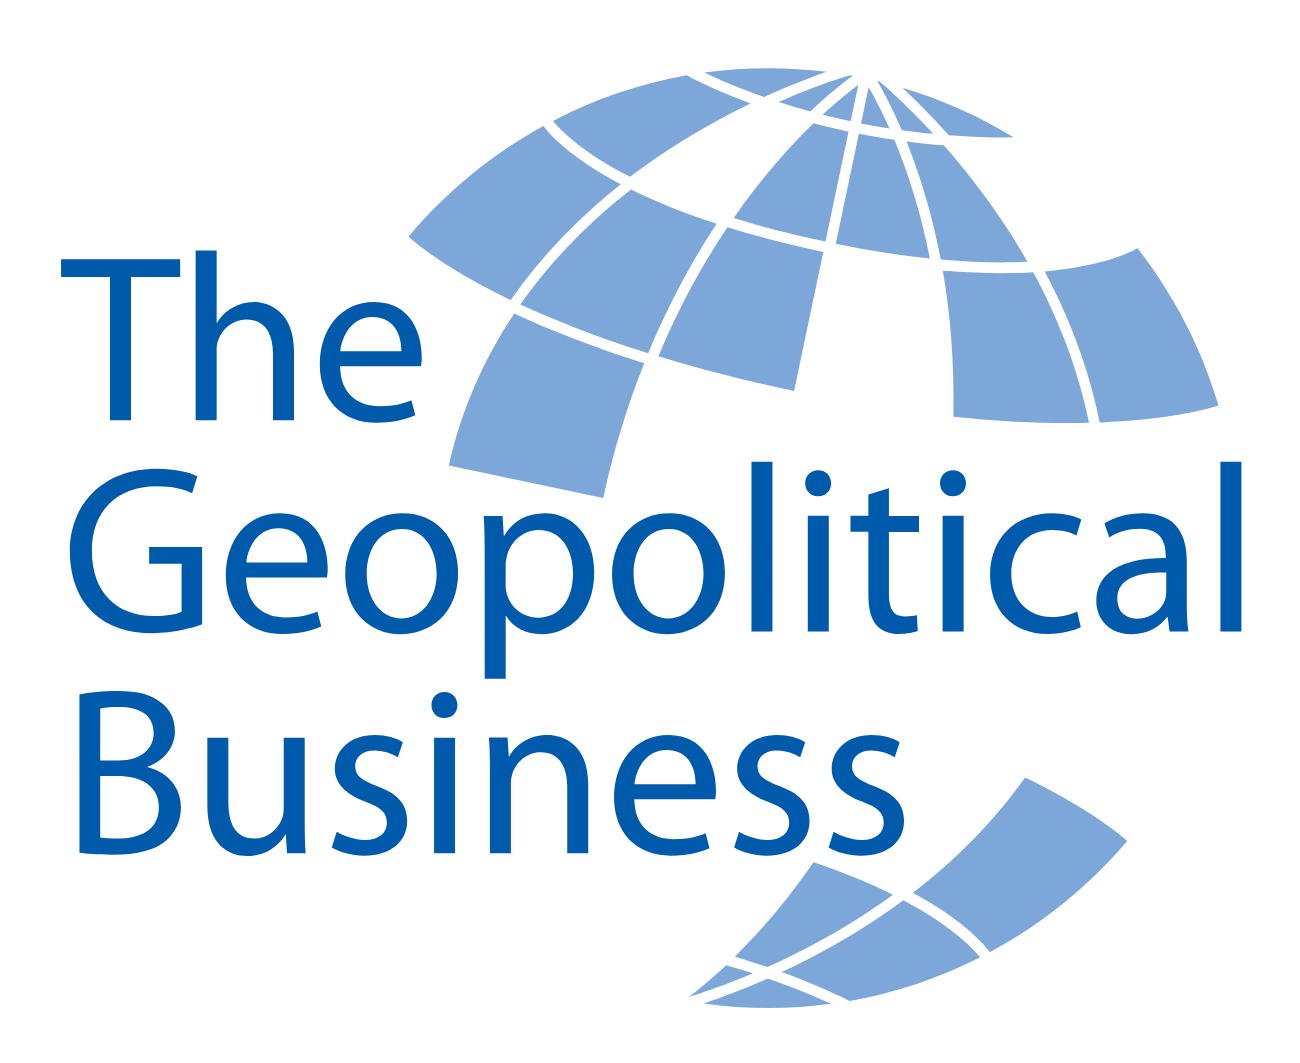 The Geopolitical Business